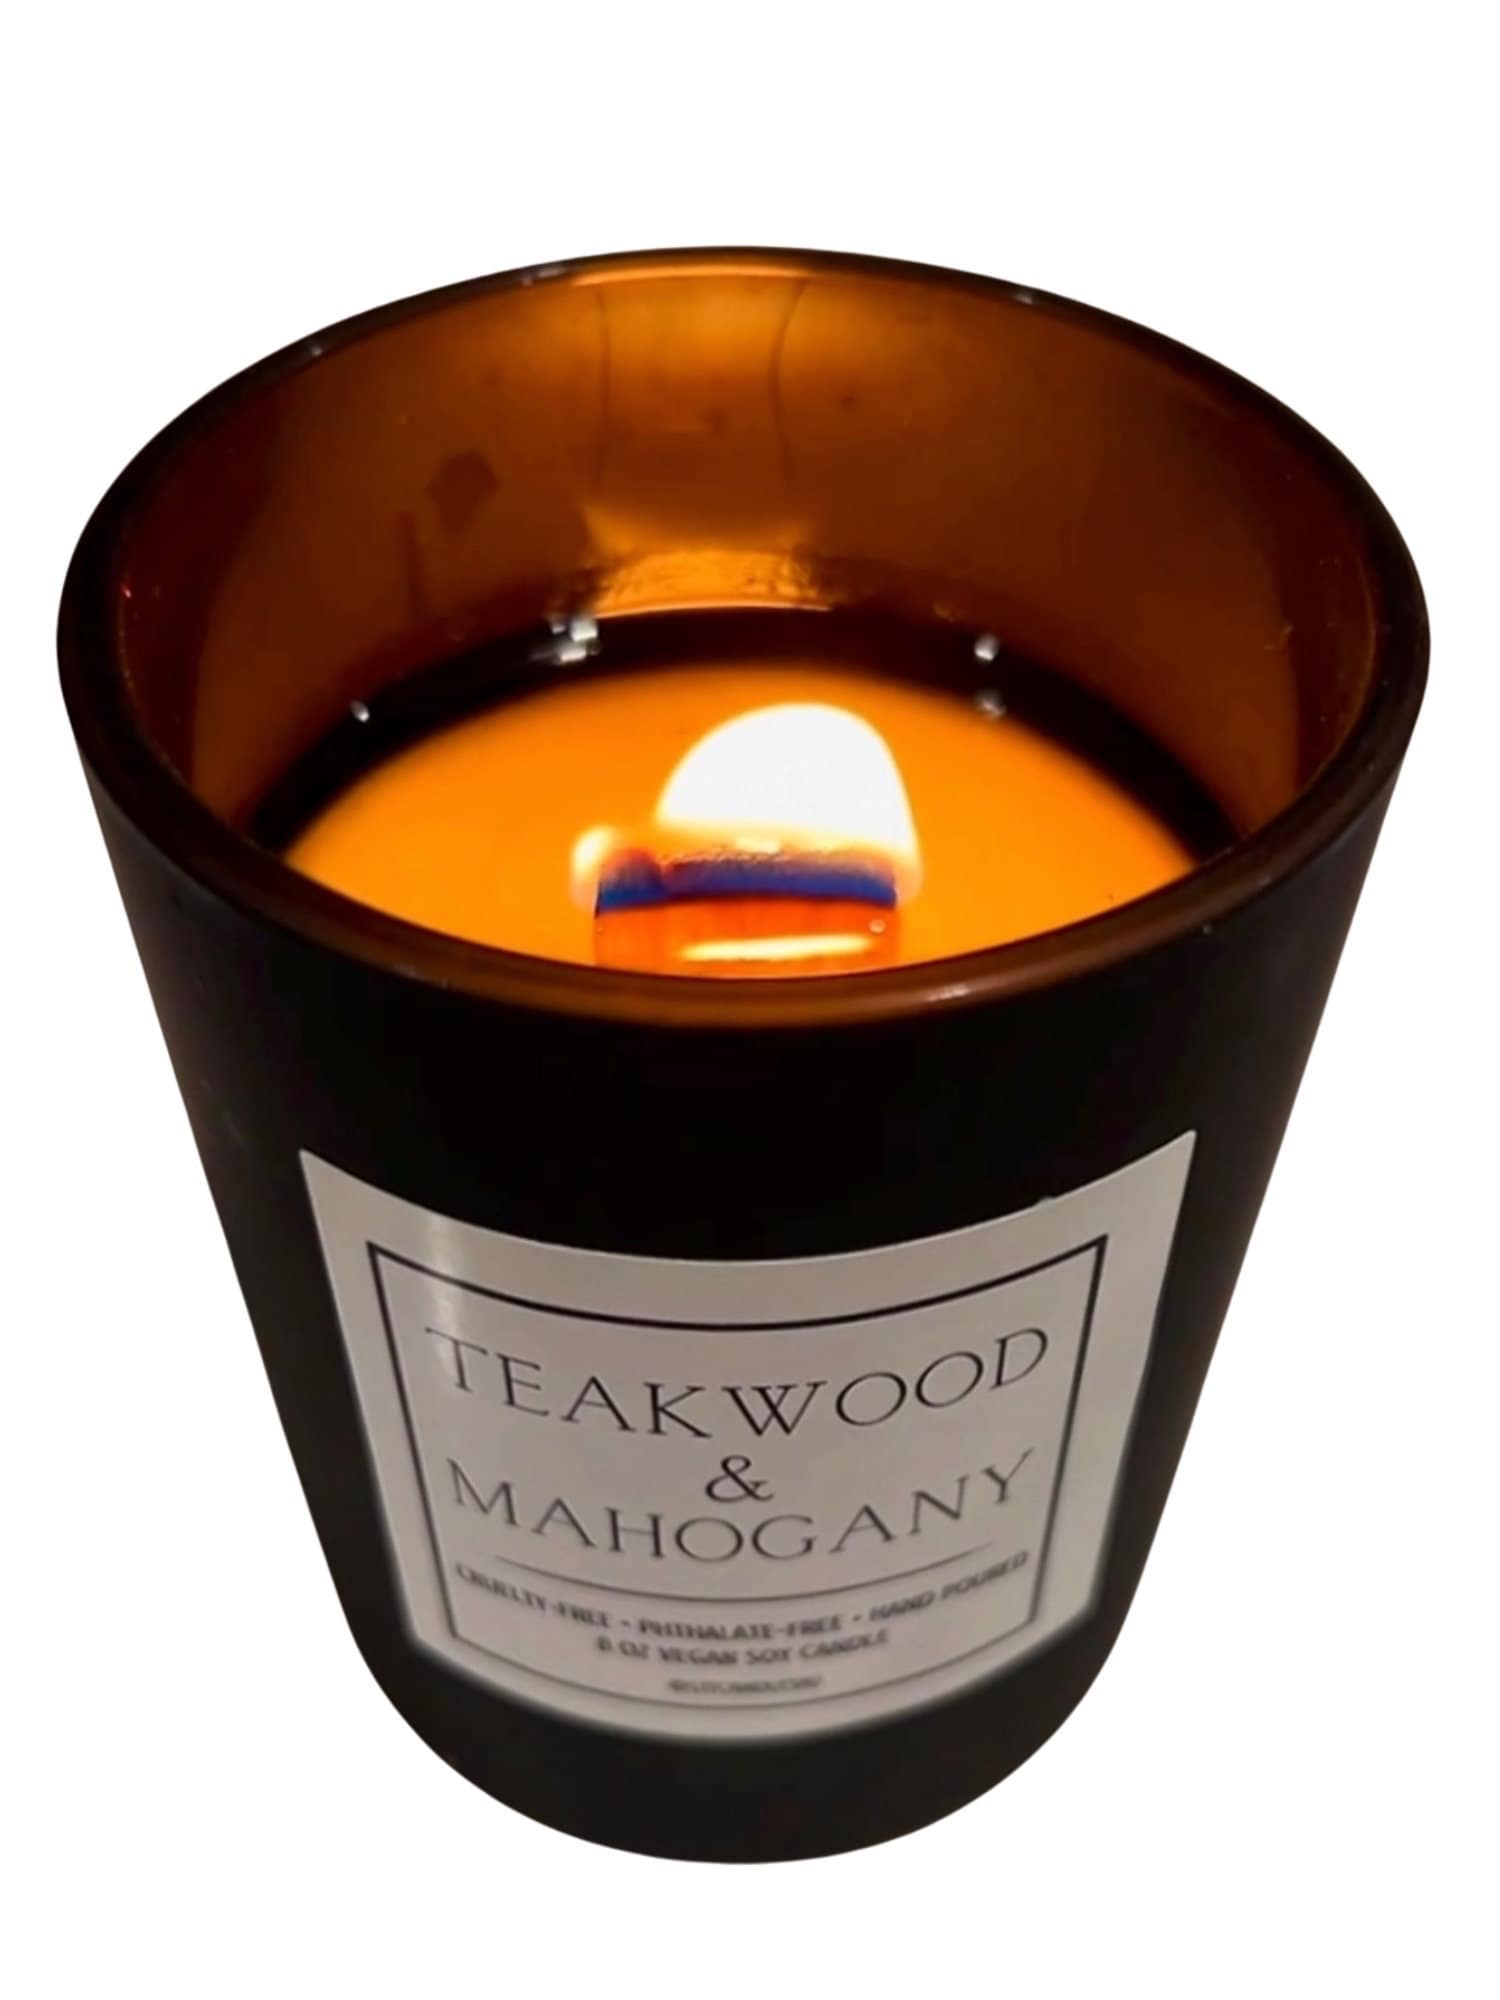 Mahogany Teakwood & Vanilla Scented cherry Wood Wick Soy Candle, Crackling  Wick, Gifts for Her, Hostess Favours 